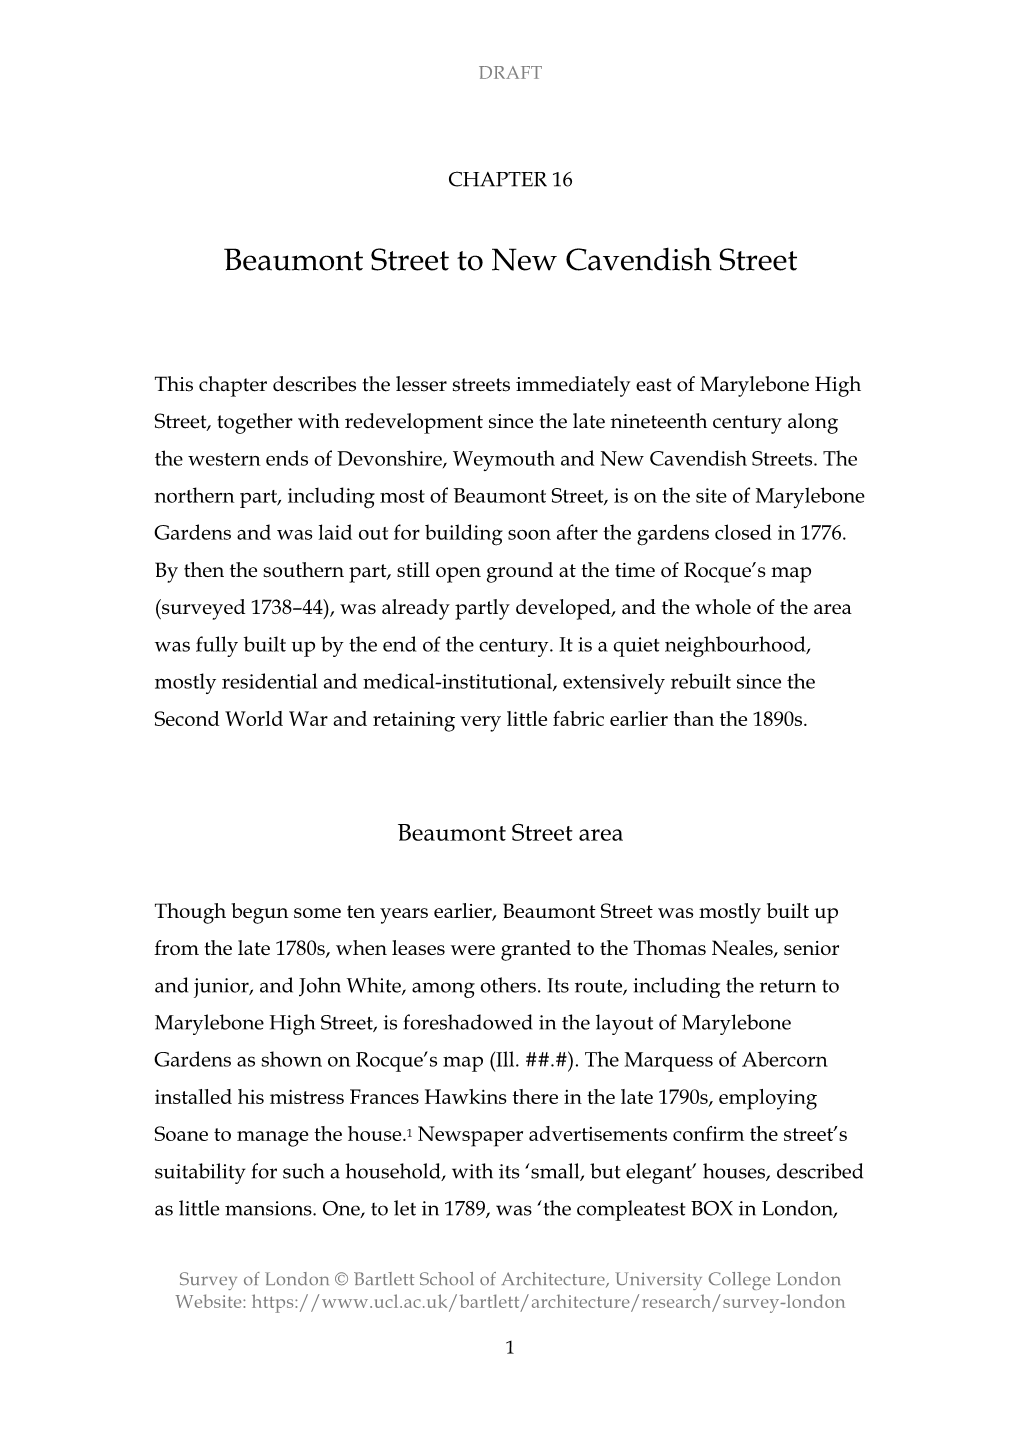 Chapter 16: Beaumont to New Cavendish Streets